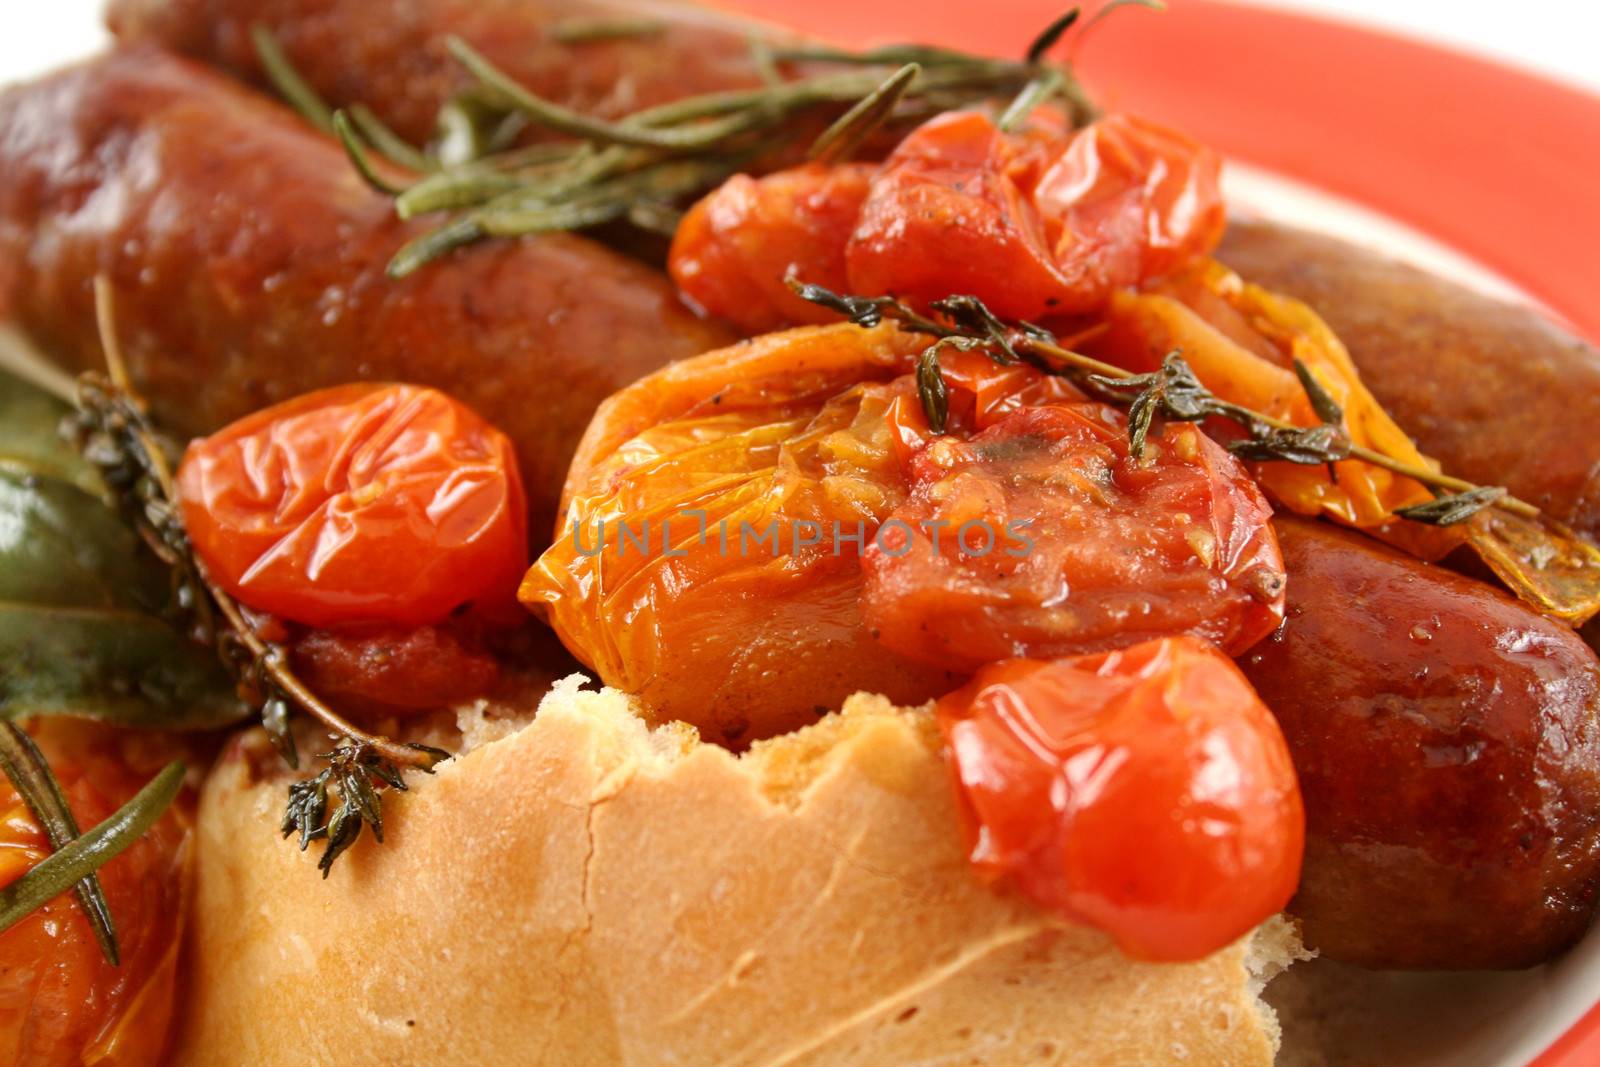 Delicious beef sausage and cherry tomato bake with rosemary.